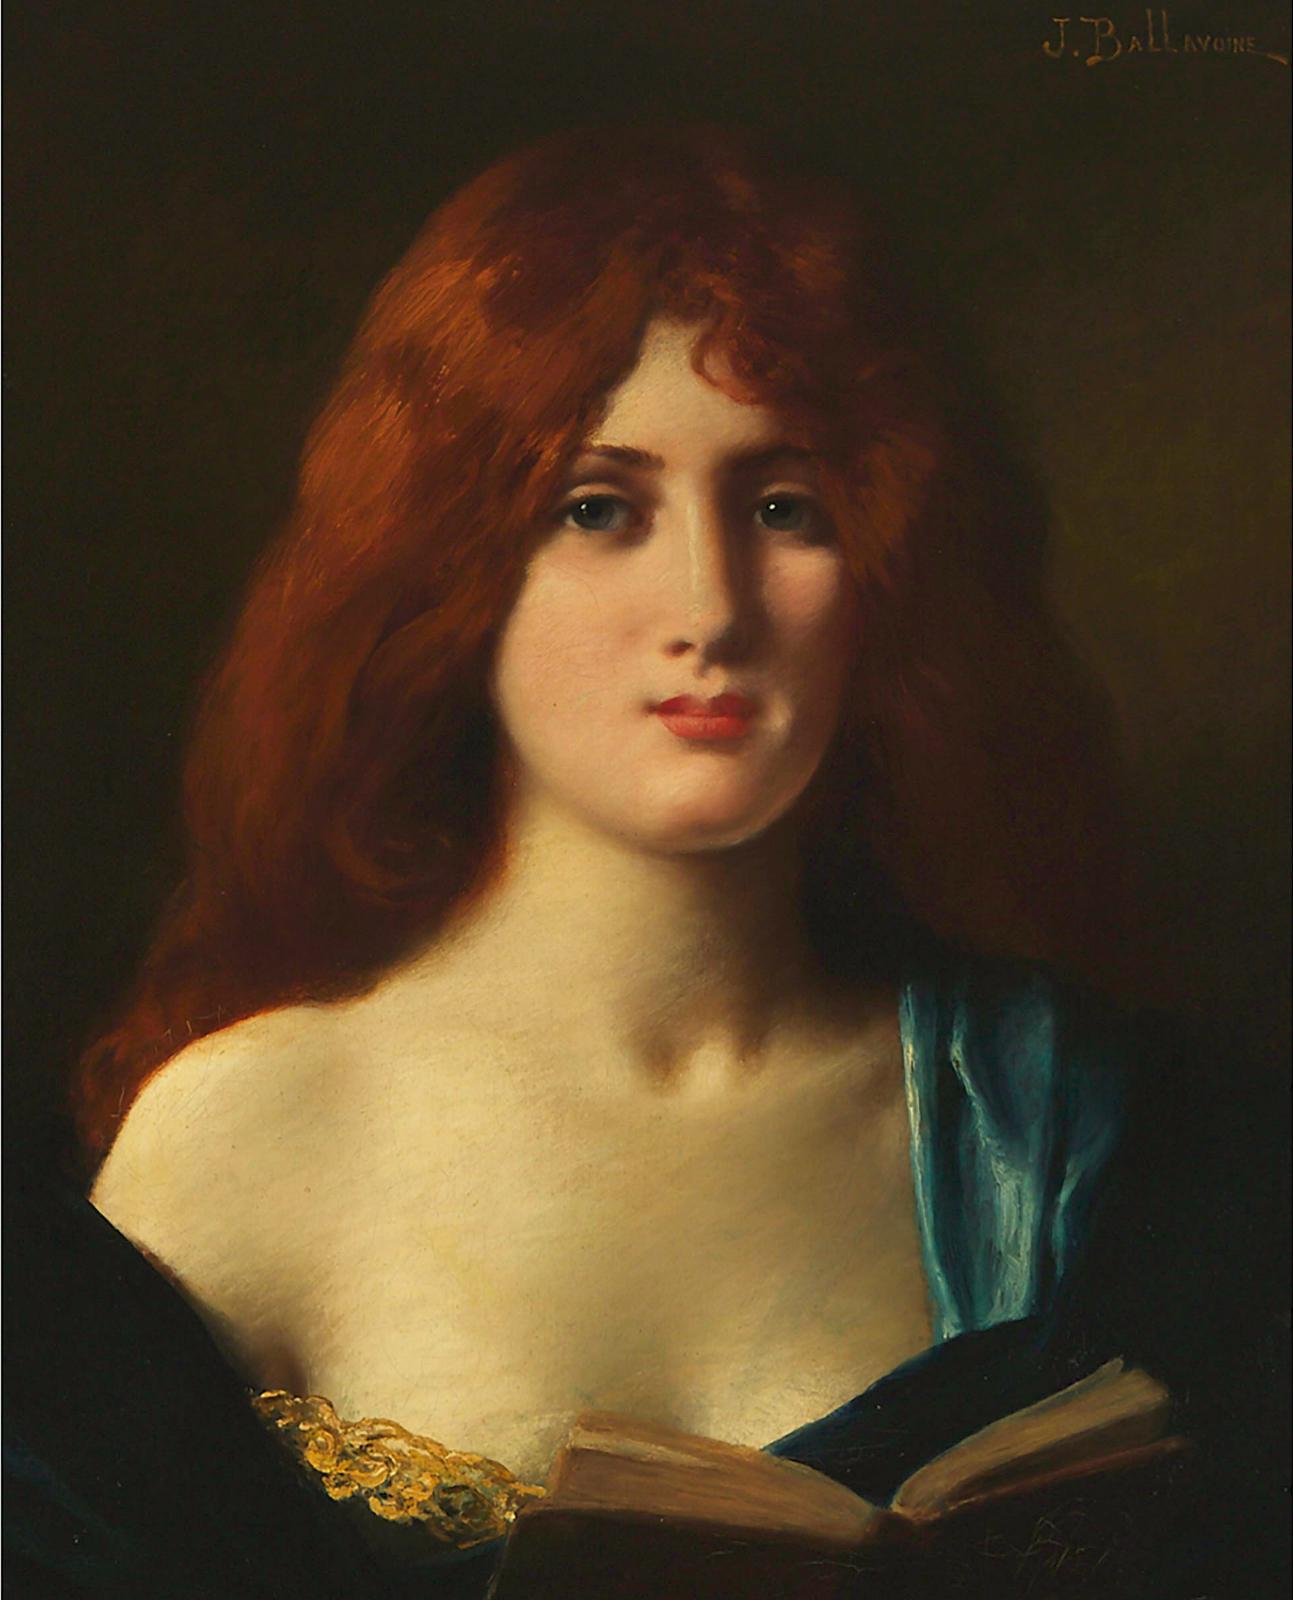 Jules Frederic Ballavoine (1855-1901) - Beauty With Red Hair